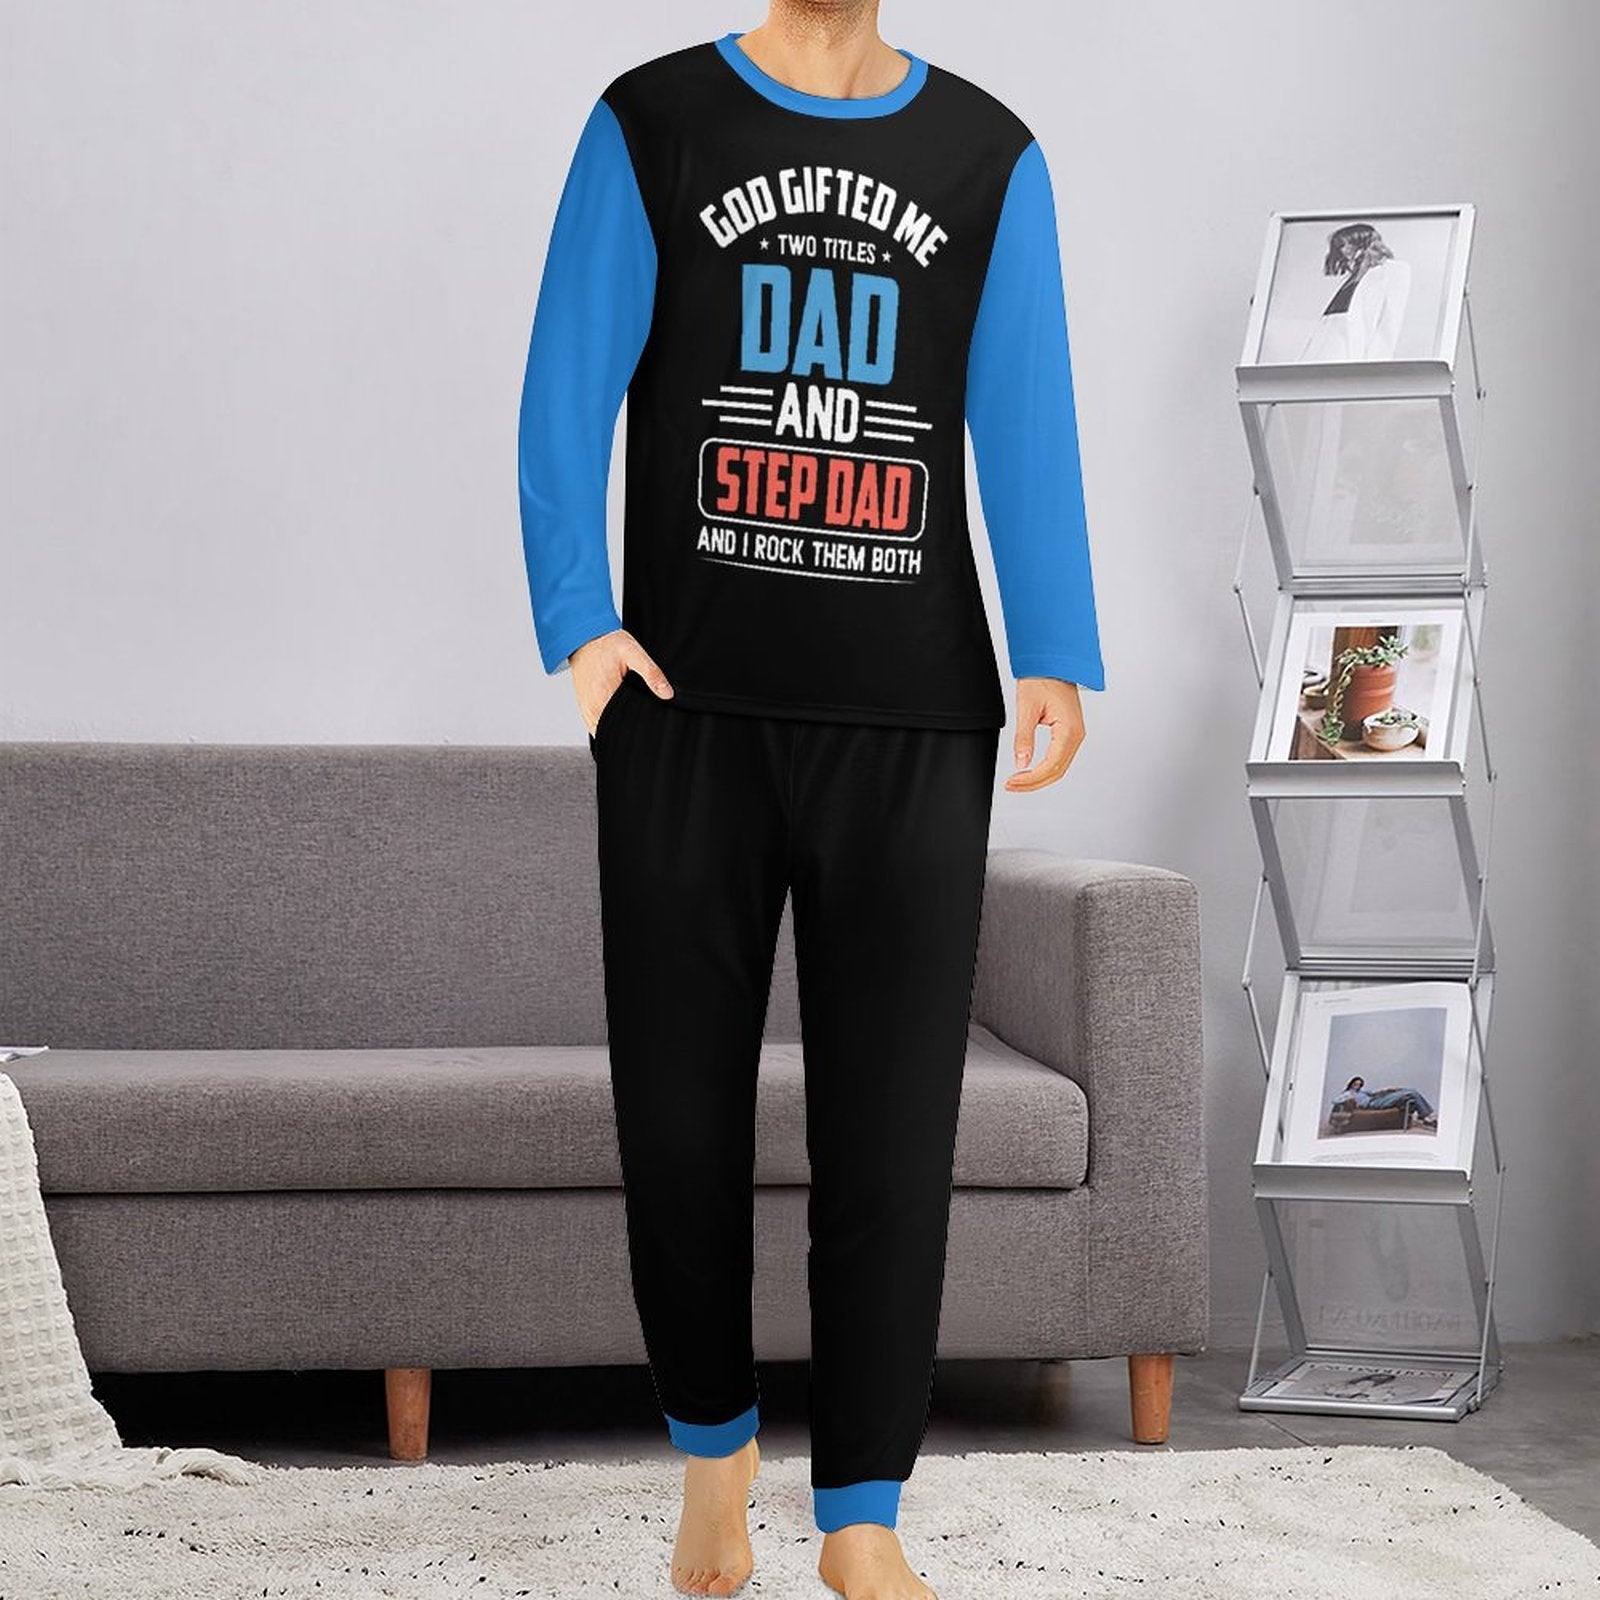 God Gifted Me Two Titles Dad And Step Dad And I Rock Them Both Men's Christian Pajamas SALE-Personal Design